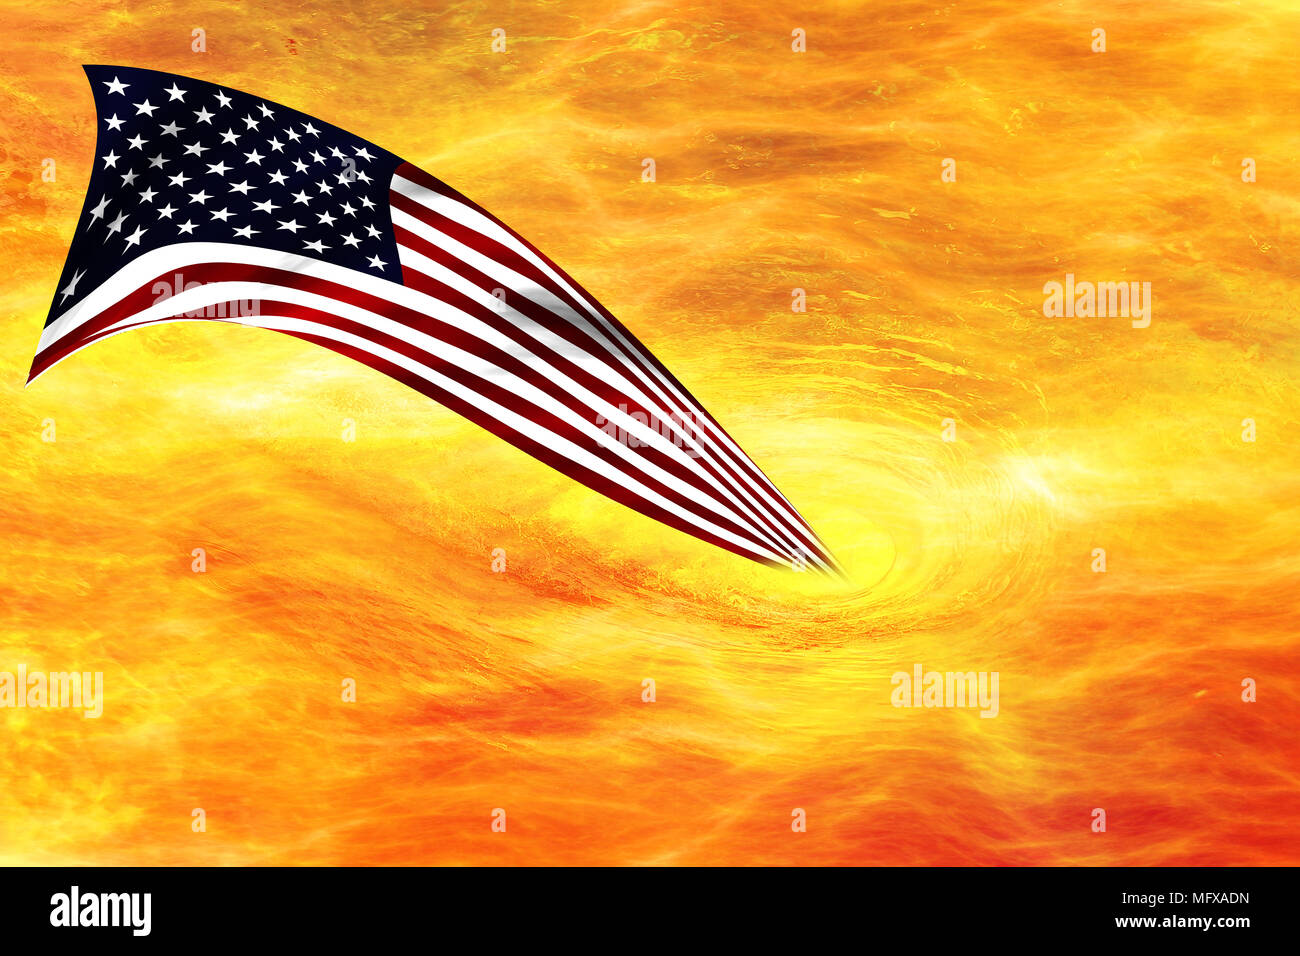 Flame spiral, fire glowing fire swirl with the flag of the United States. Stock Photo